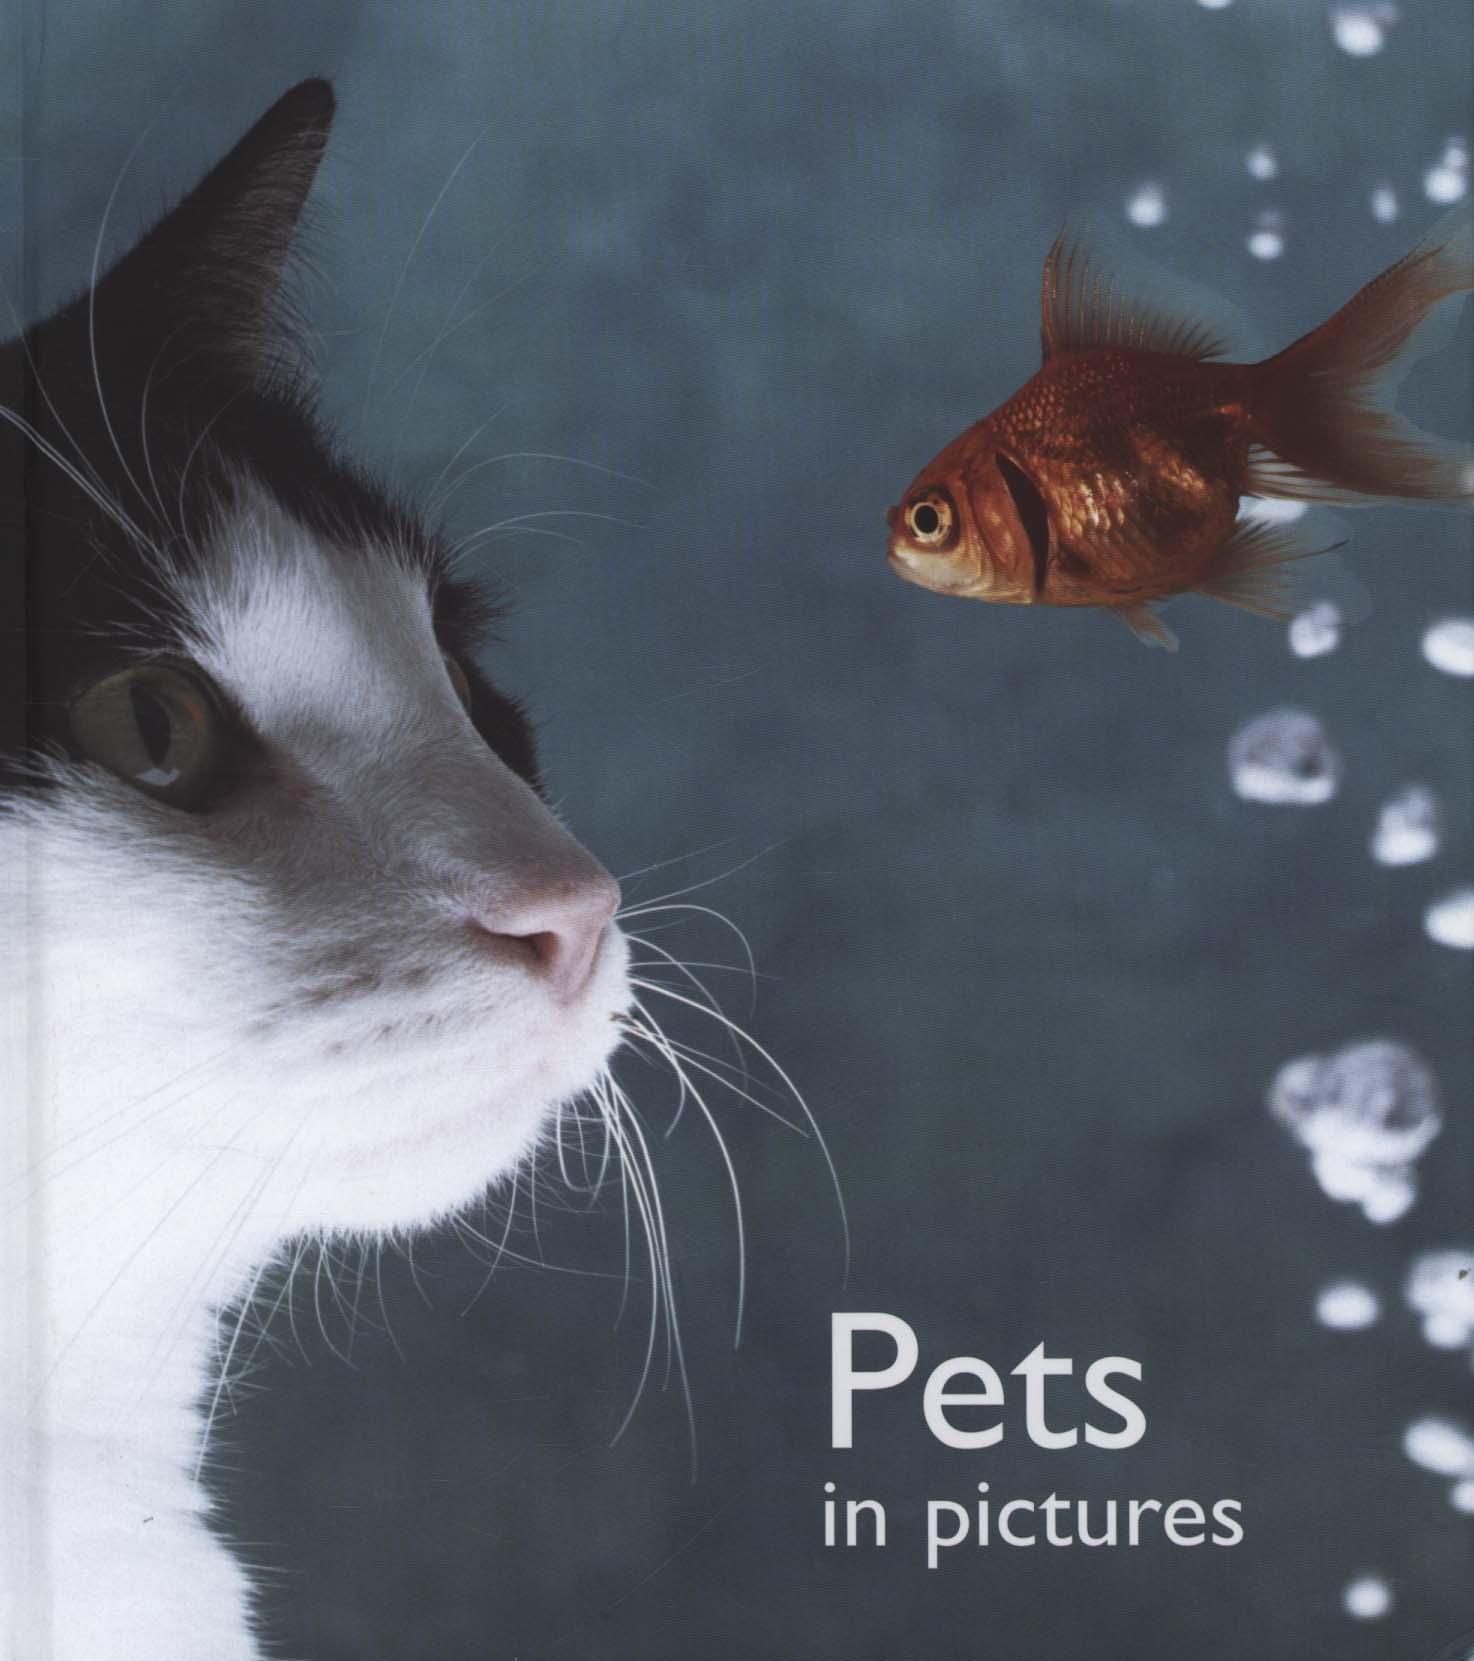 Pets in Pictures